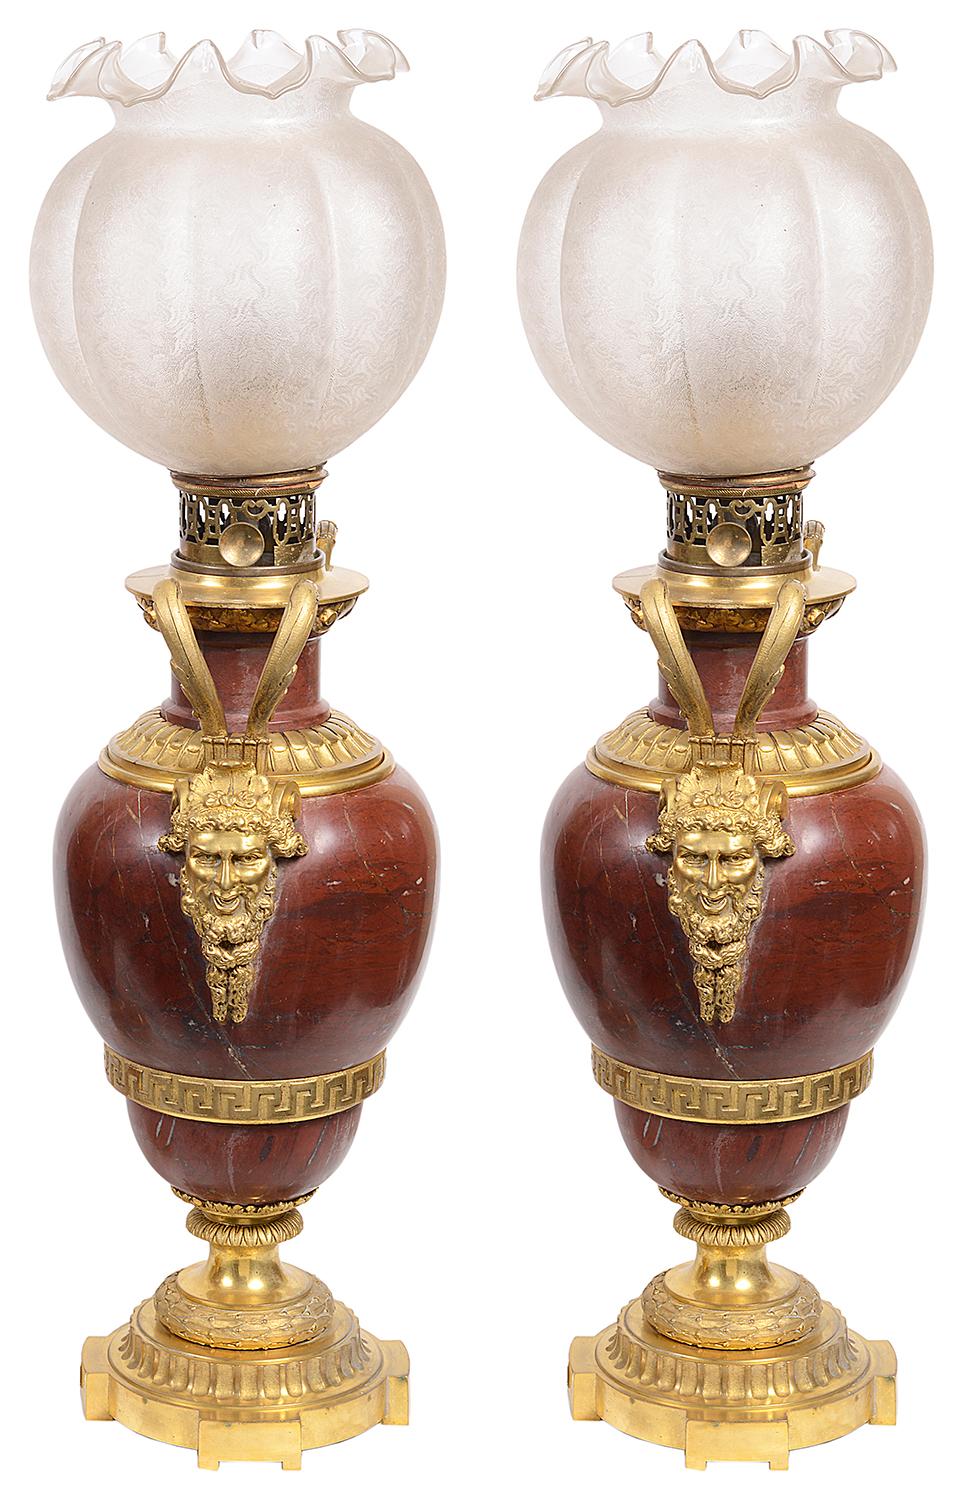 A very impressive pair of 19th century French classical oil lamps, each with their original scalloped glass shades, wonderful gilded ormolu scrolling handles coming down to the beard mask mounts on either side. The rouge marble body with Greek key